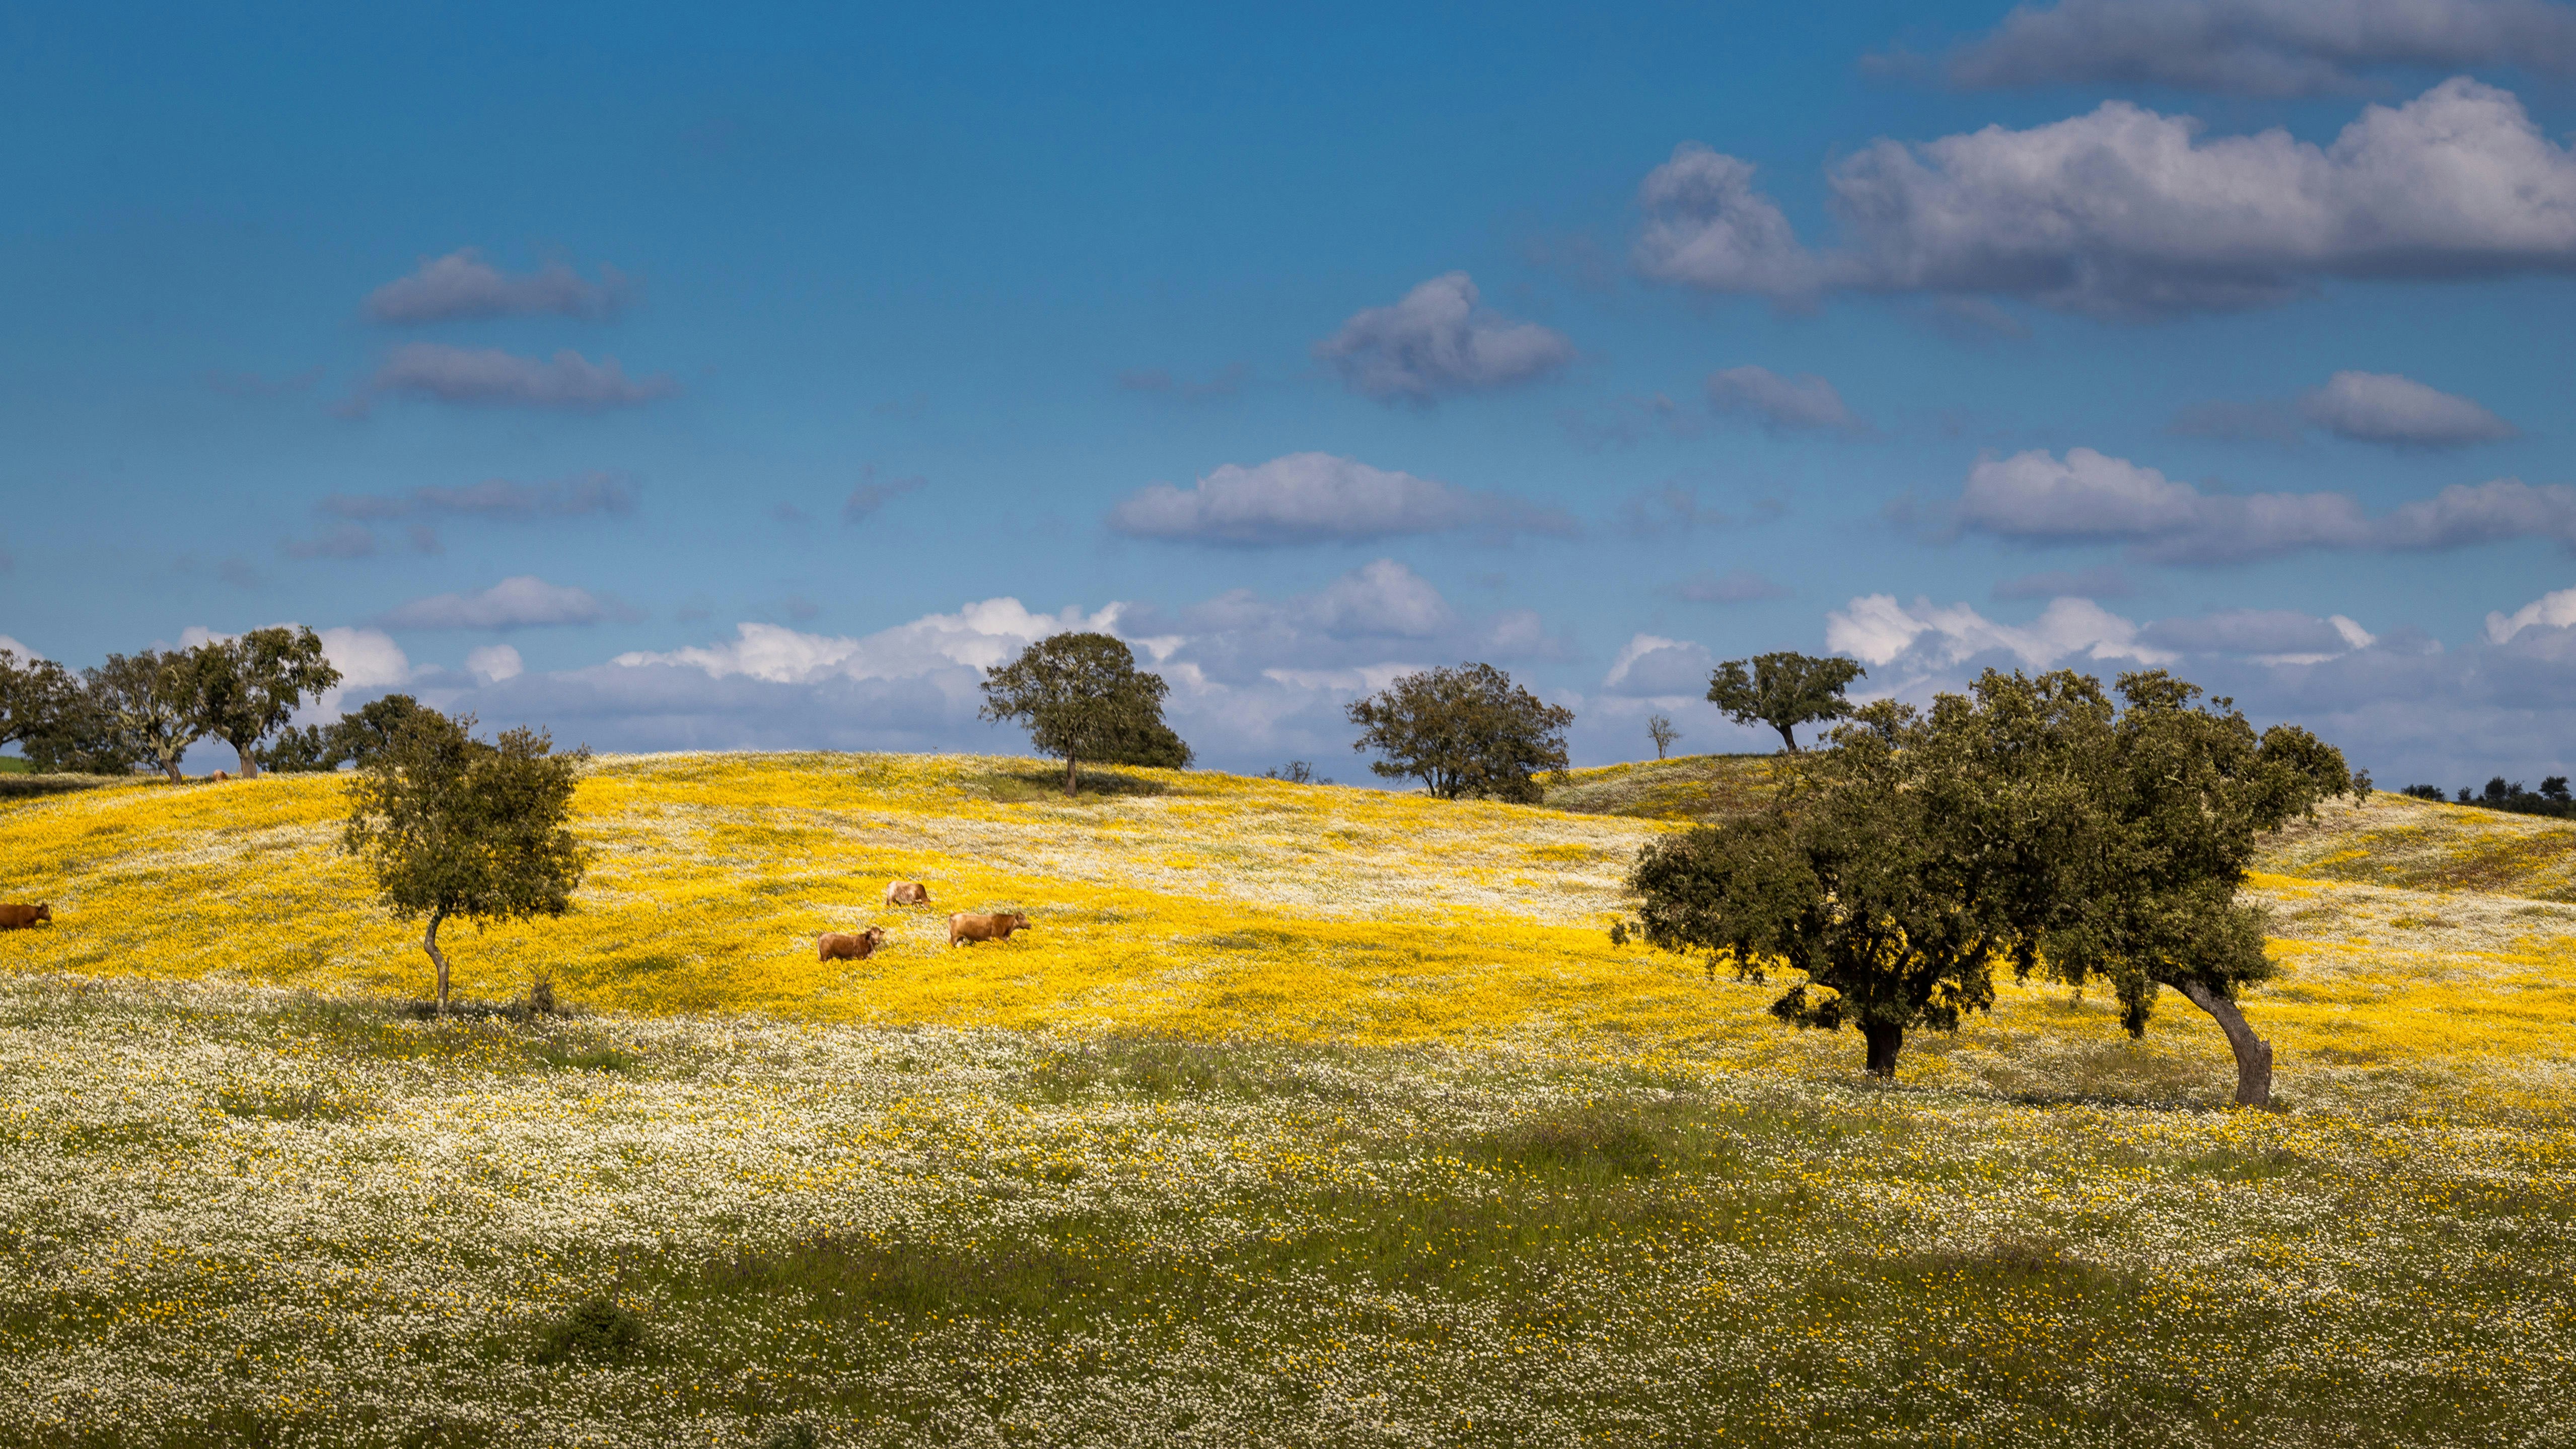 Landscape of Alentejo with a trees, animals and wild flowers.